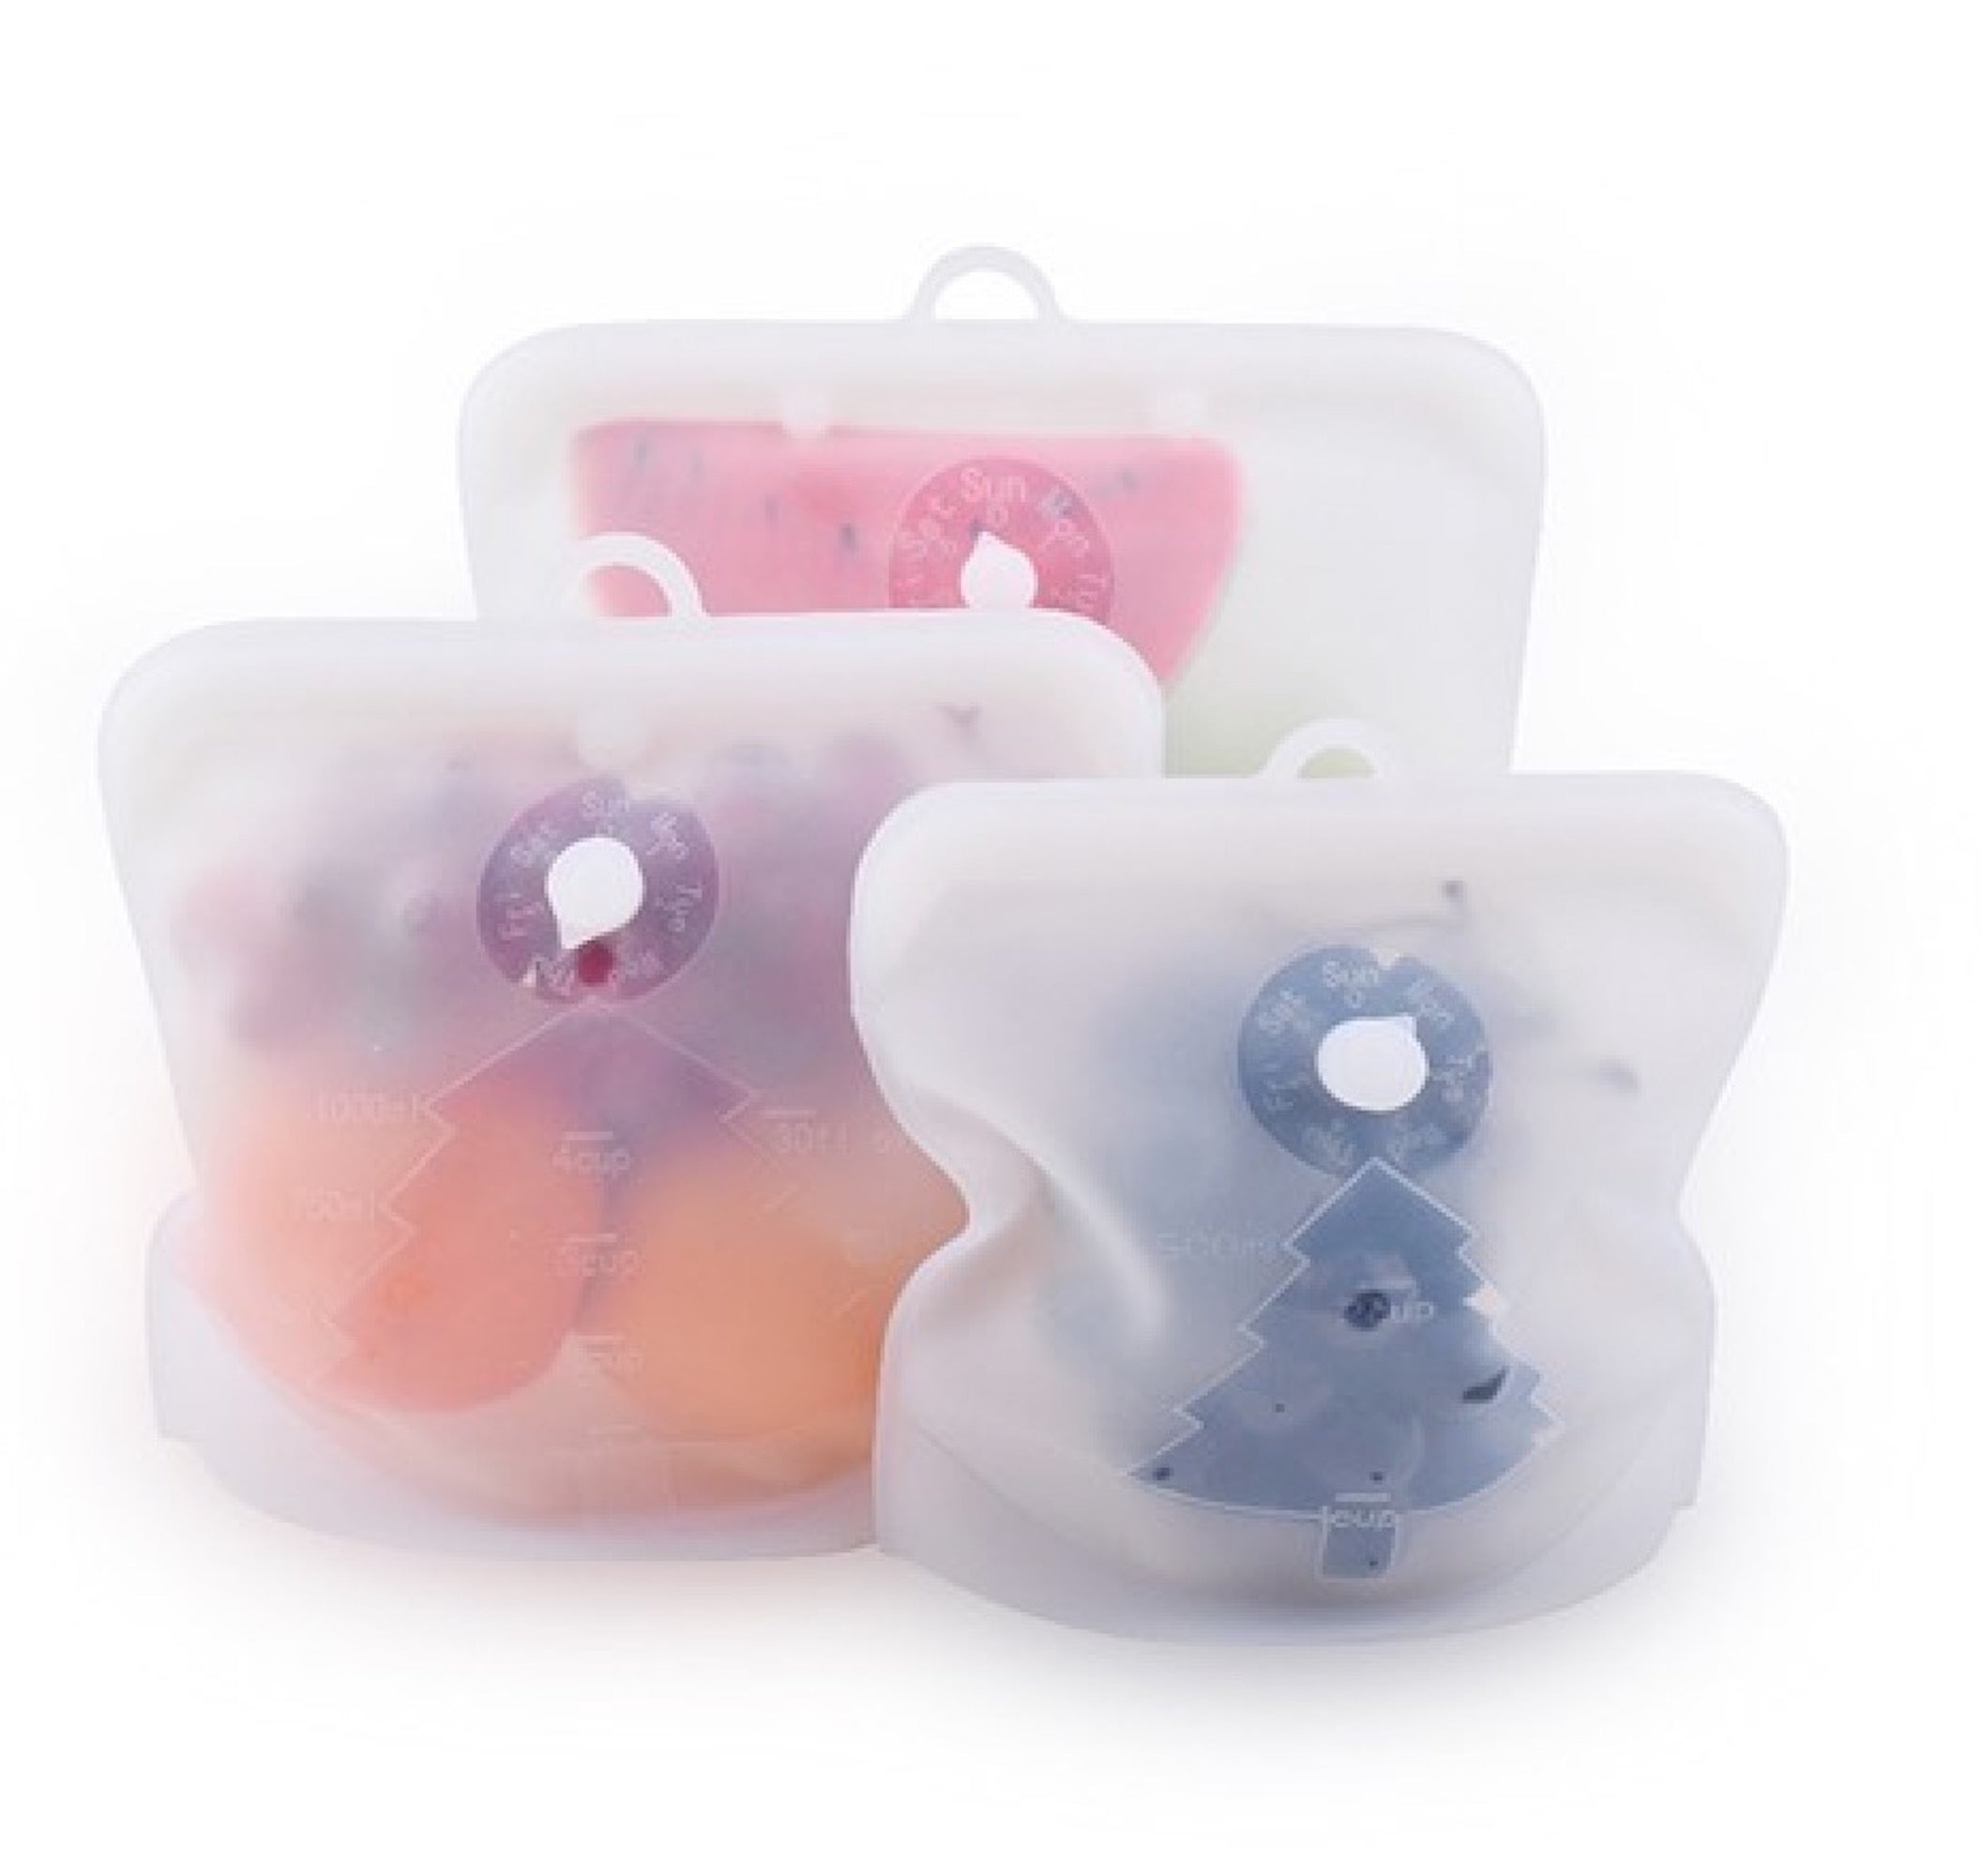 Reusable Silicone Food Storage Bags – Set of 4